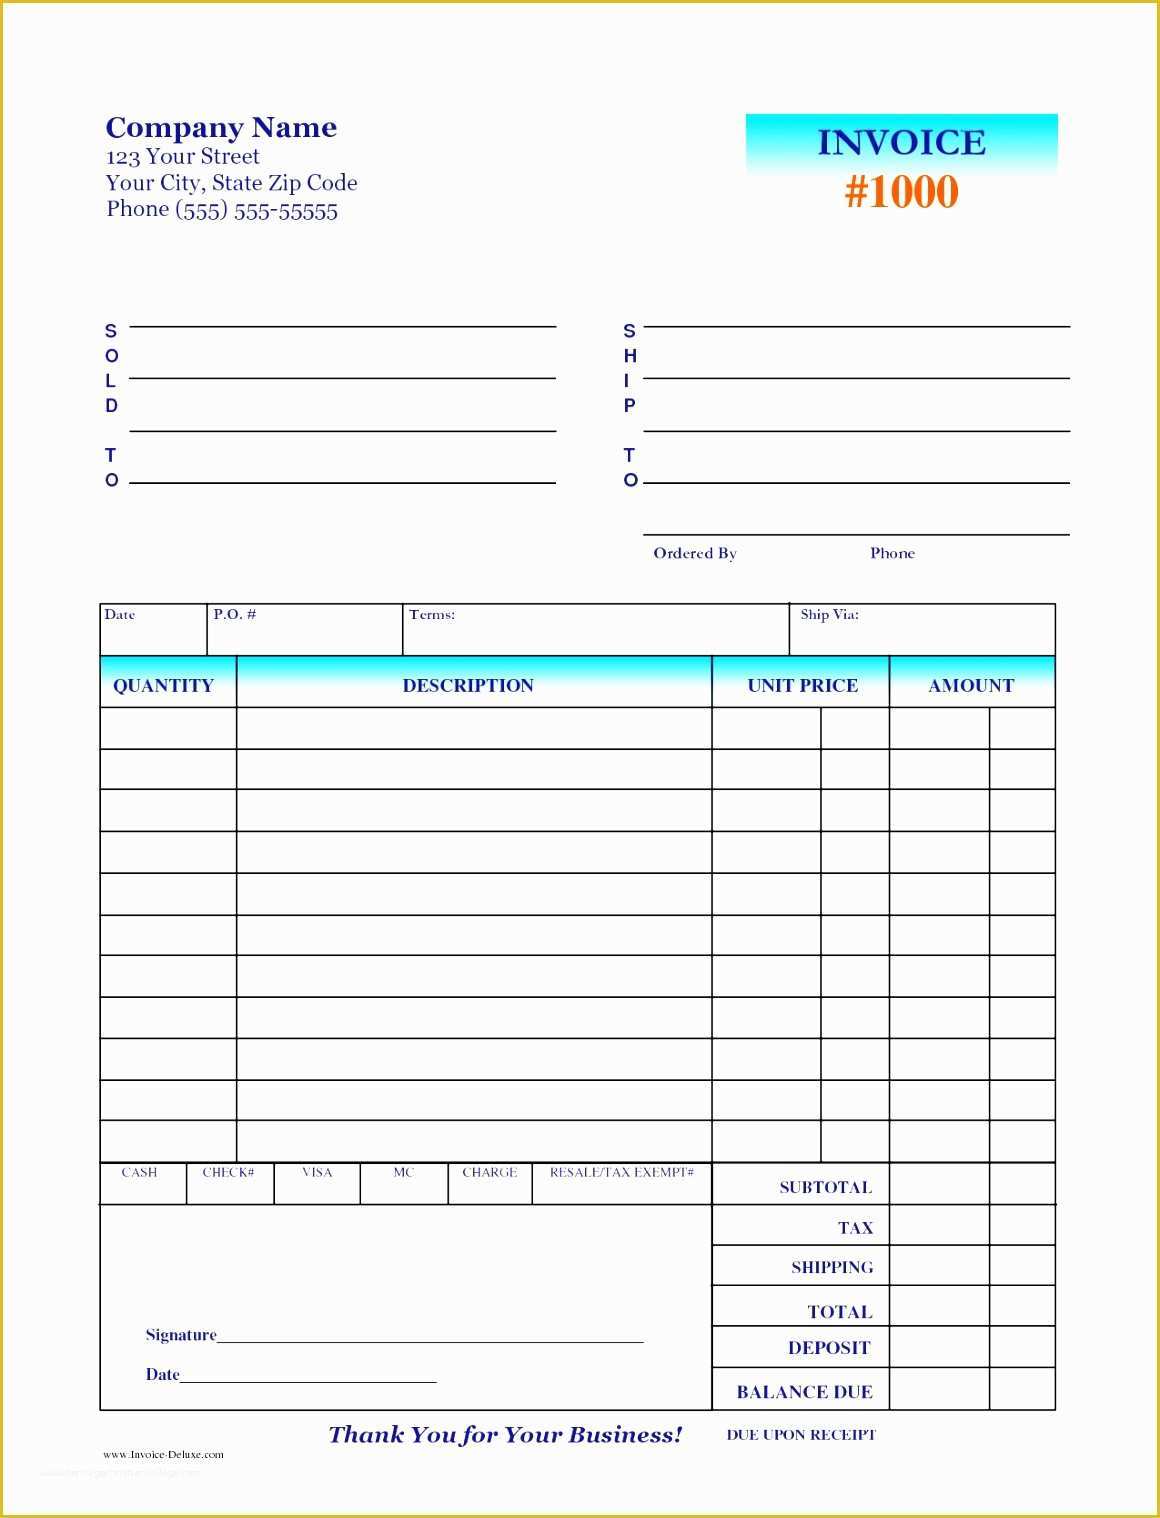 Free Accounts Receivable Template Of 12 Account Receivable Template Excel format